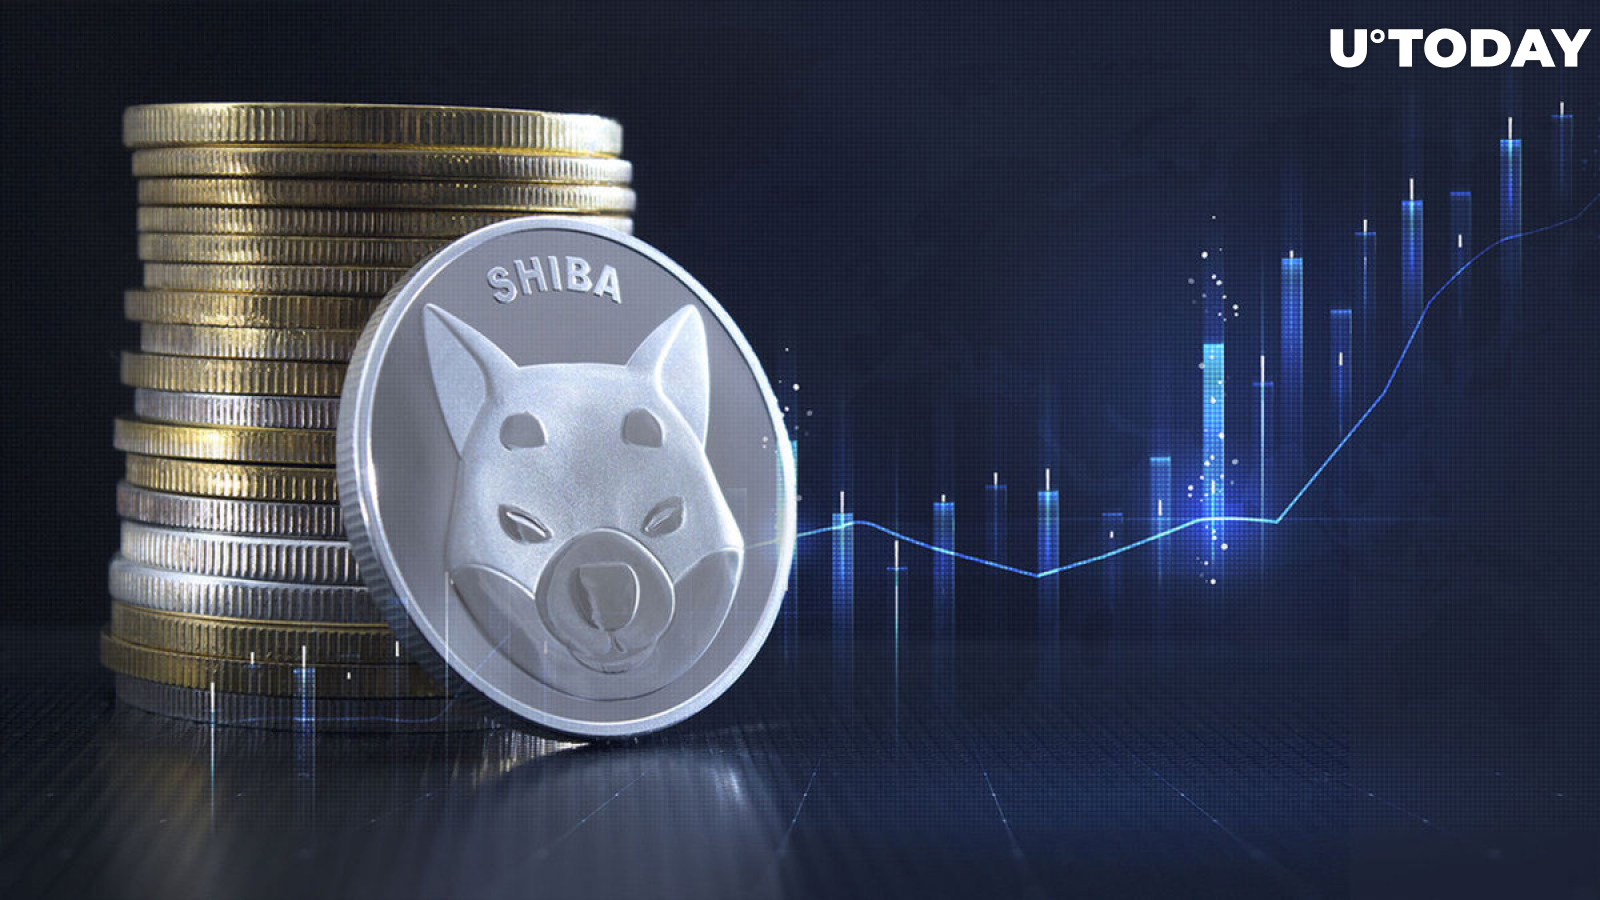 Shiba Inu (SHIB) up 11% Against Dogecoin (DOGE) Thanks to This Flaw